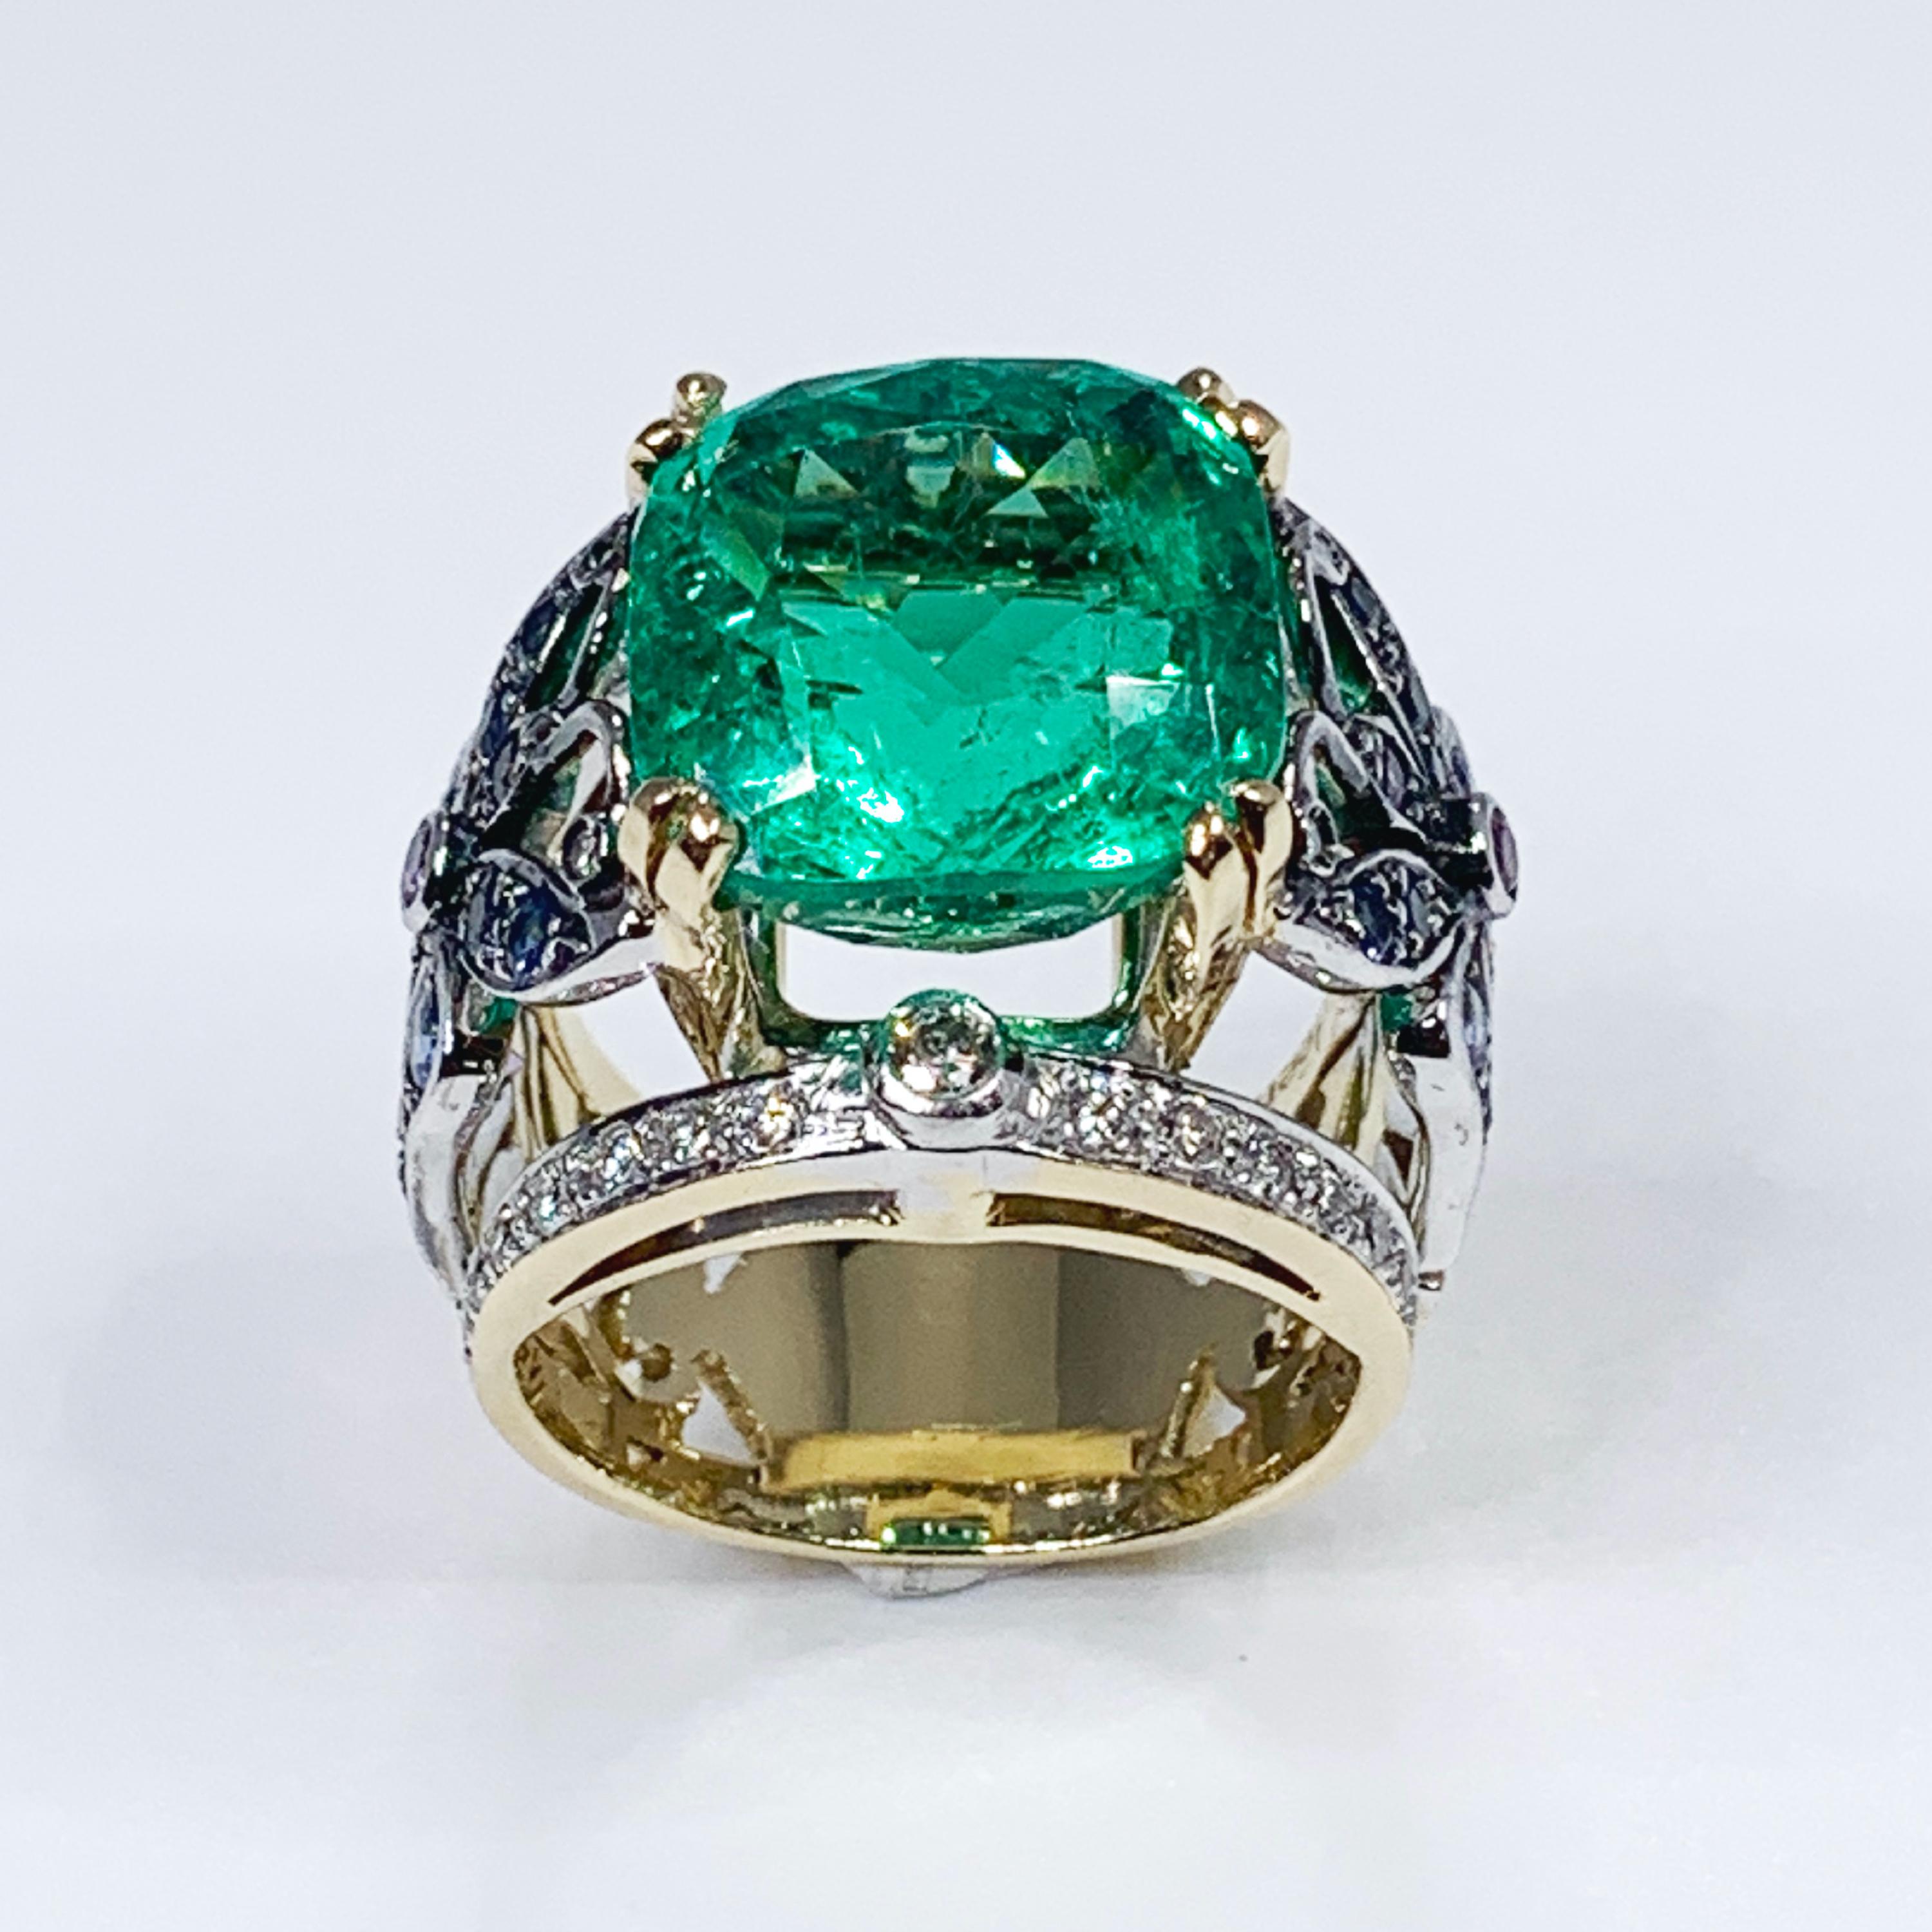 Cushion Cut 11.5 Carat Colombian Emerald, Sapphires, Diamond Gold Embroidery Ring by Édéenne For Sale